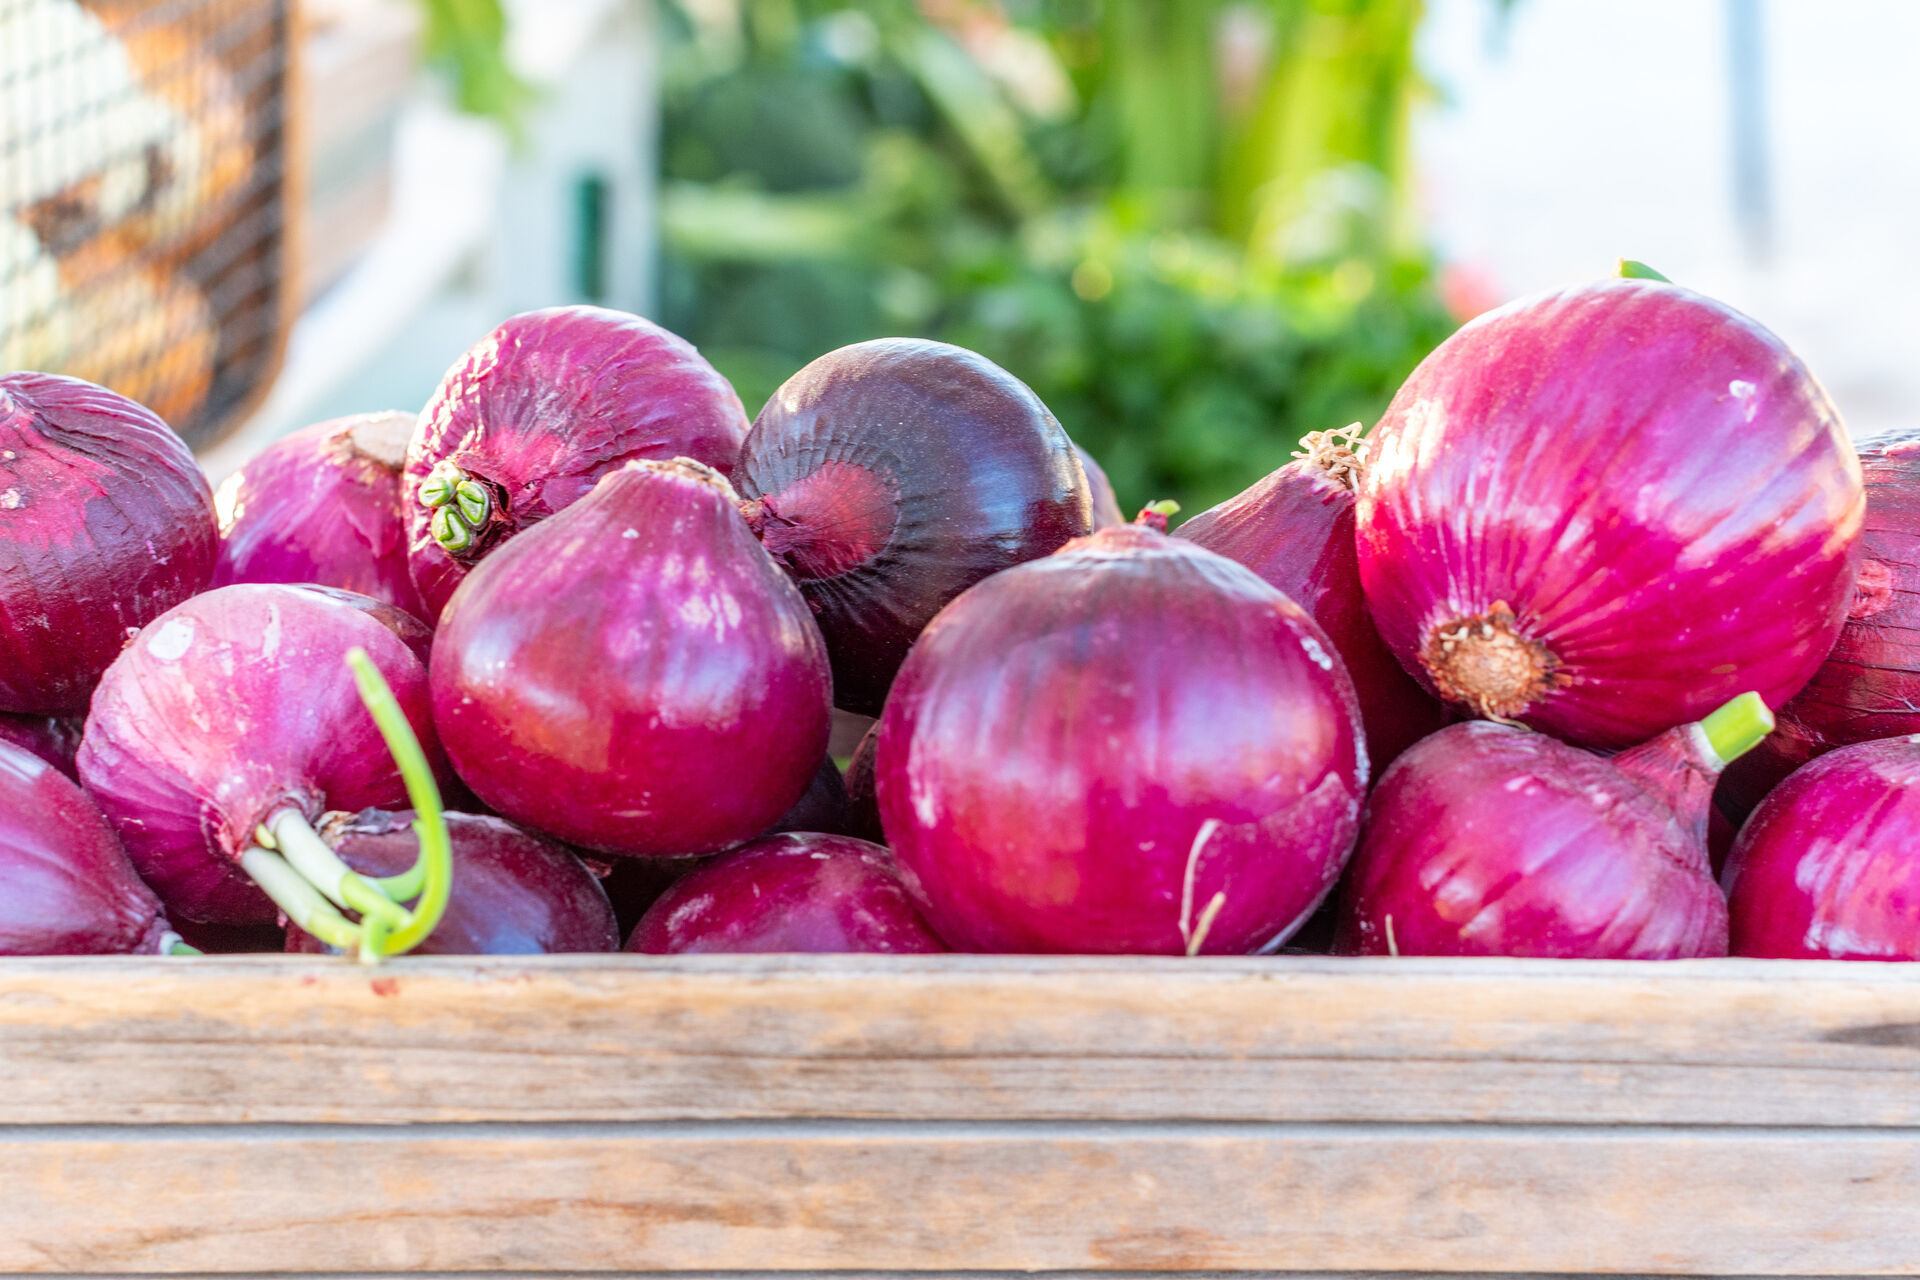 Delicious organic red onions for your guacamole dip?